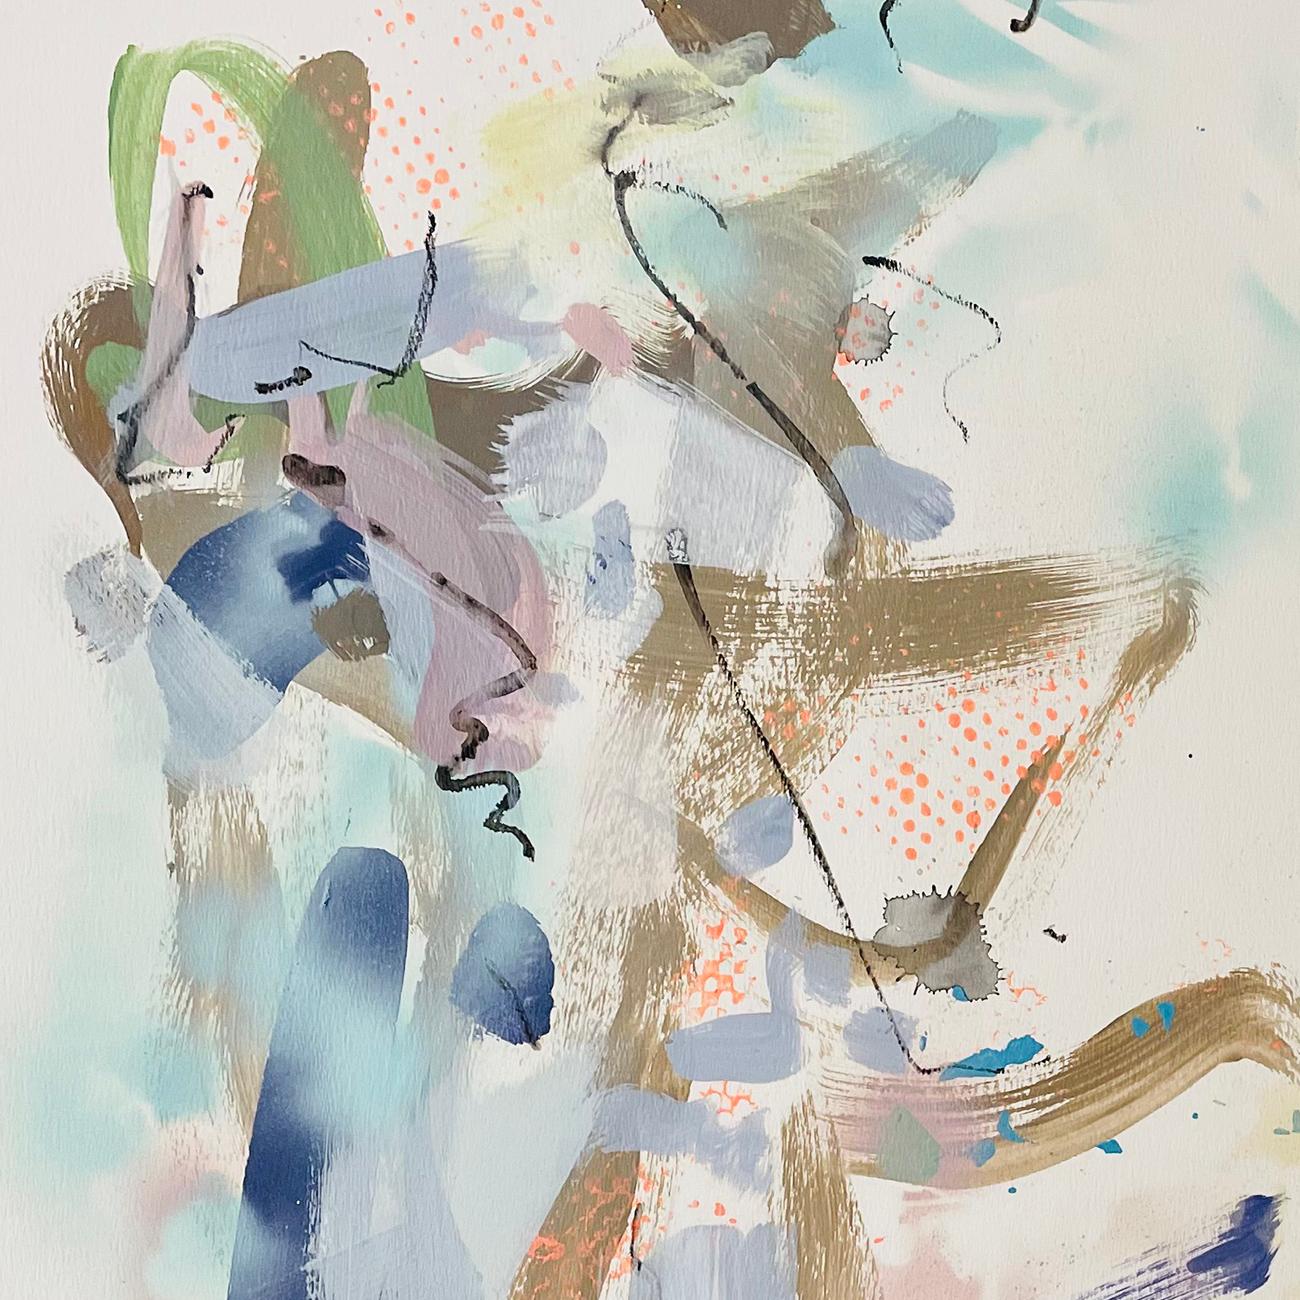 Gesture 2 (Abstract painting)

Acrylic on paper - unframed

Werfel employs expressive, lyrical gestures that create bursts of movement and energy. Her color choices create a range of tones from the muted and serene to the vibrant and electric.